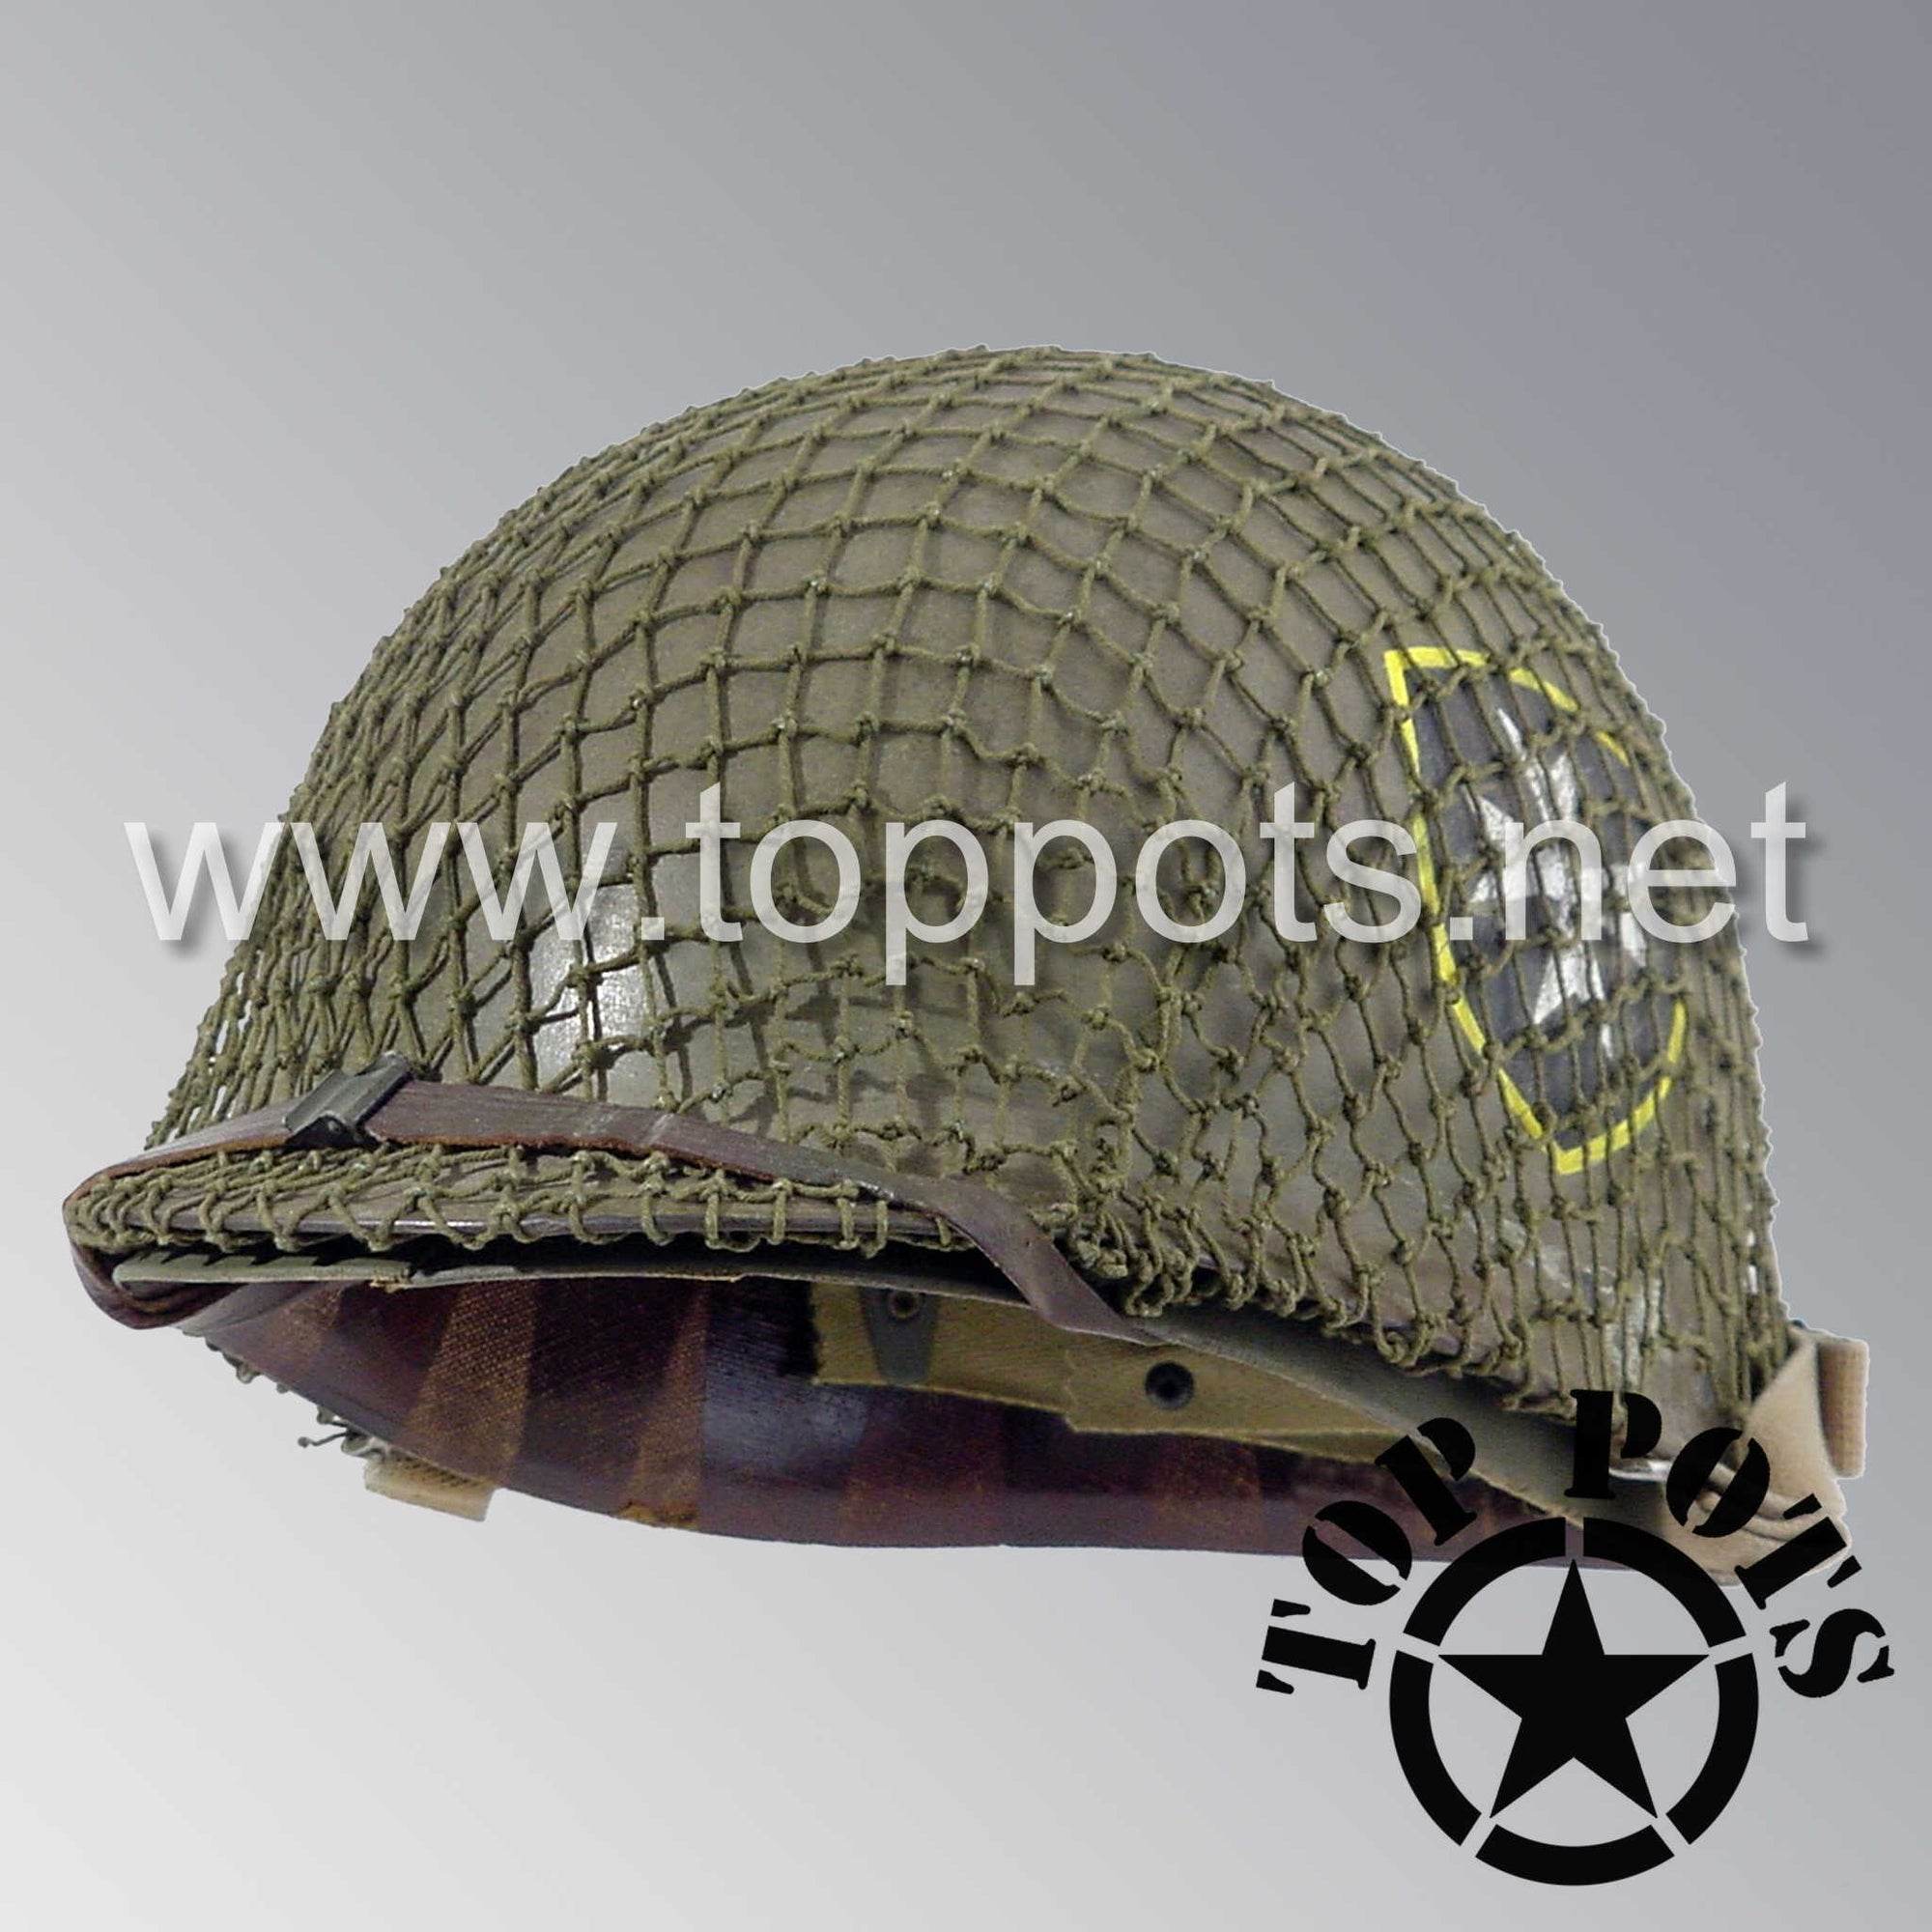 Korean War US Army Aged Original M1 Infantry Helmet Swivel Bale Shell and Liner with 65th Infantry Regiment Emblem and Net